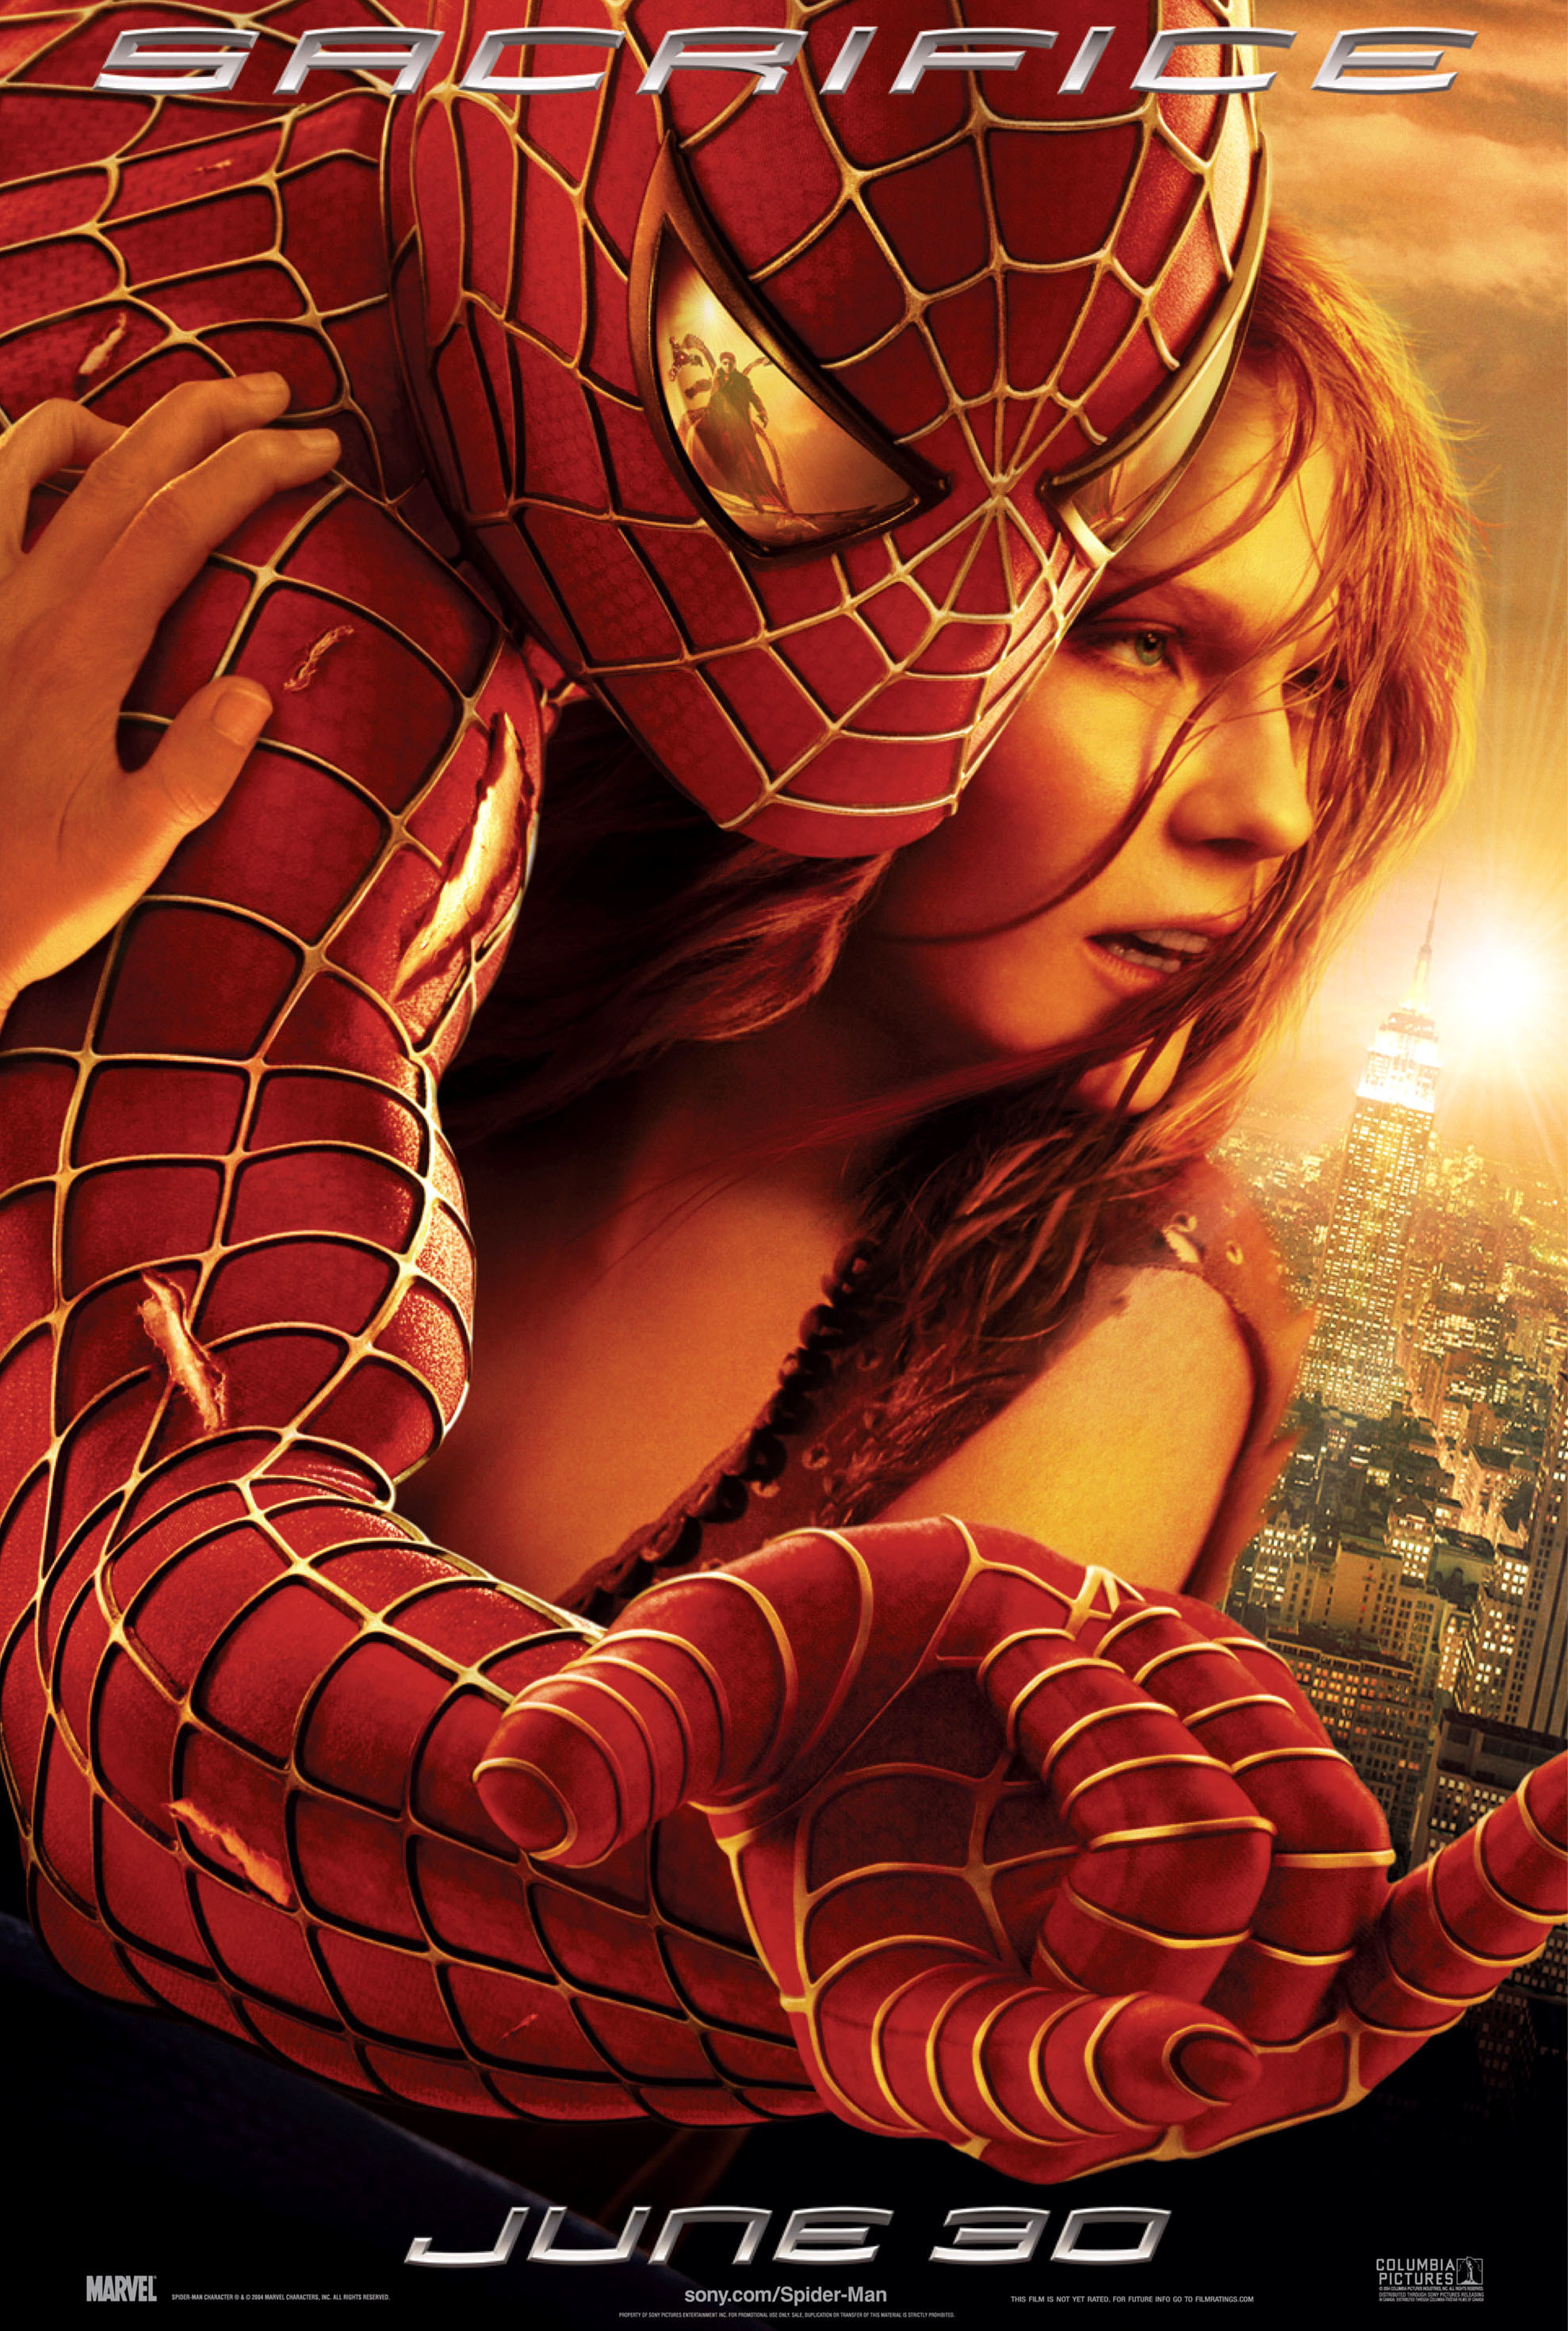 The poster for Spider-Man 2